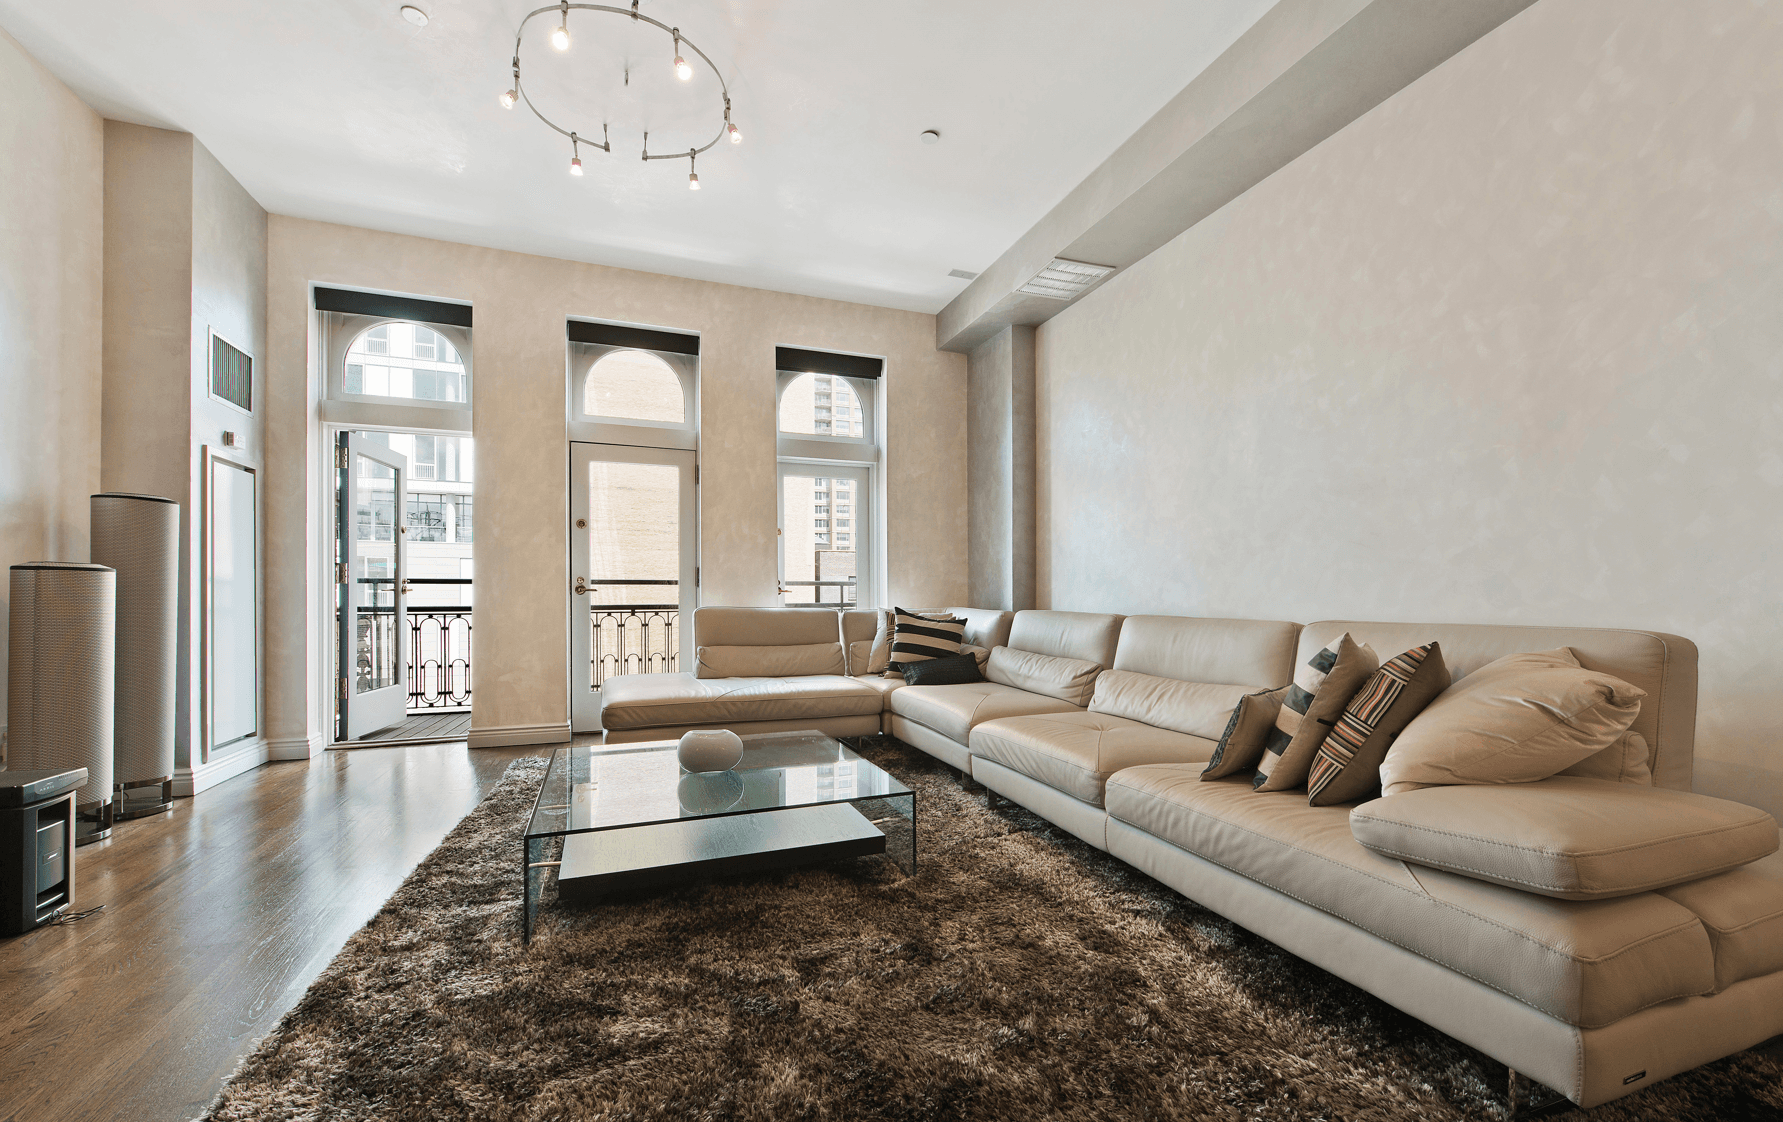 Enter this dramatic Penthouse loft to extra high ceilings and a stunning floating glass staircase.